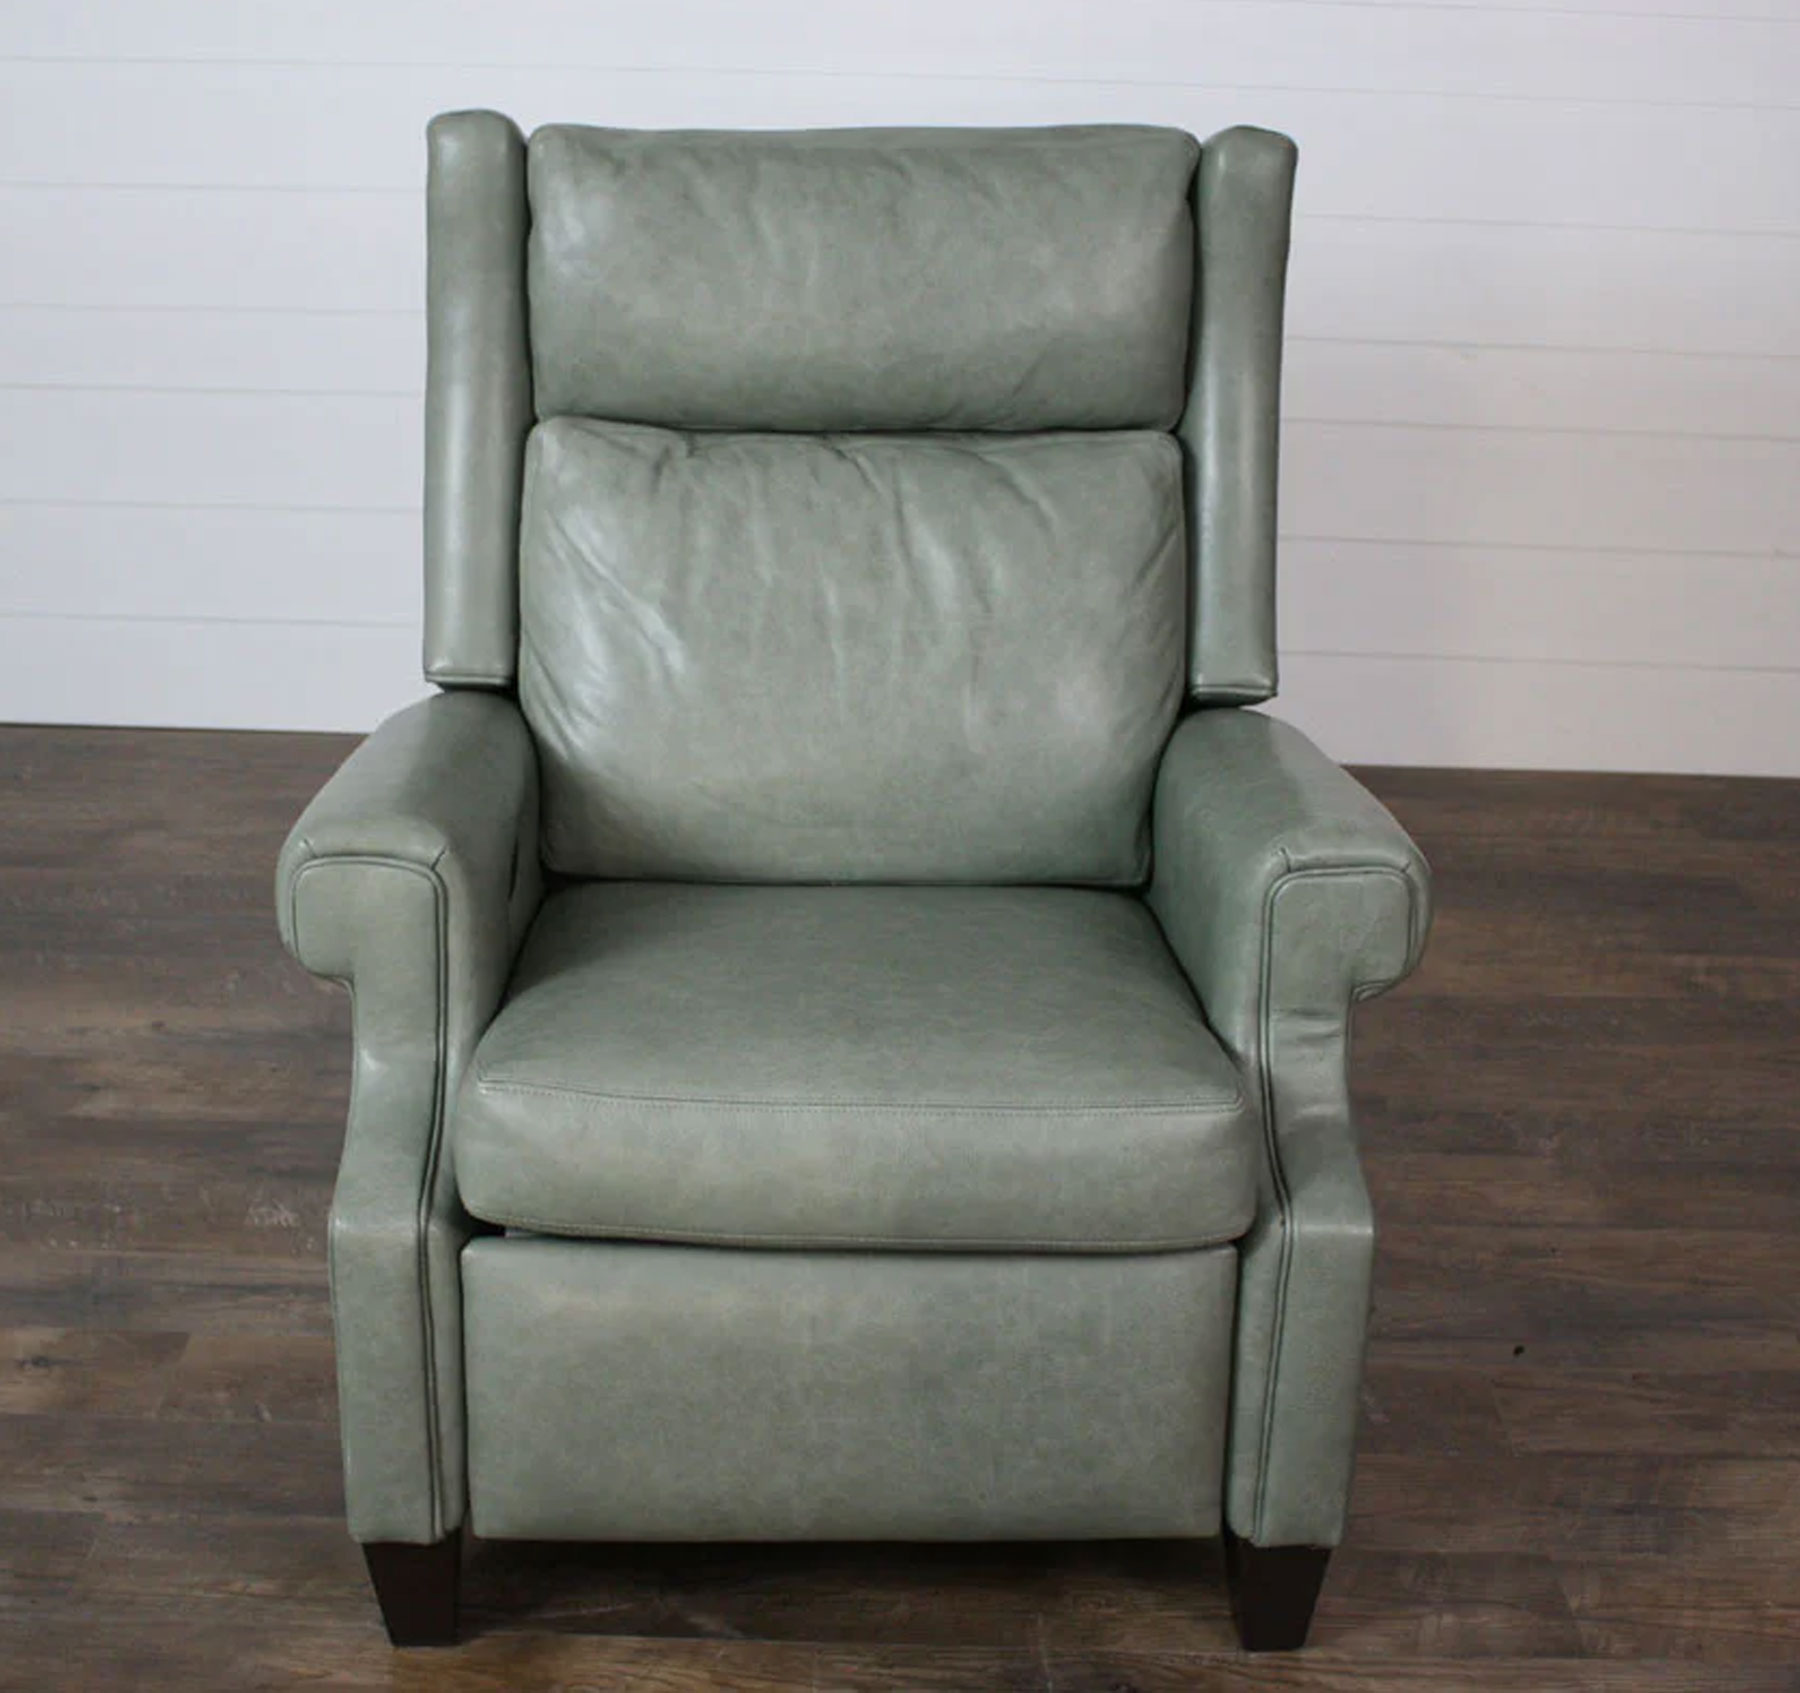 McKinley Leather 108 Gregory Recliner in Tippy Fair Isle Sage Leather